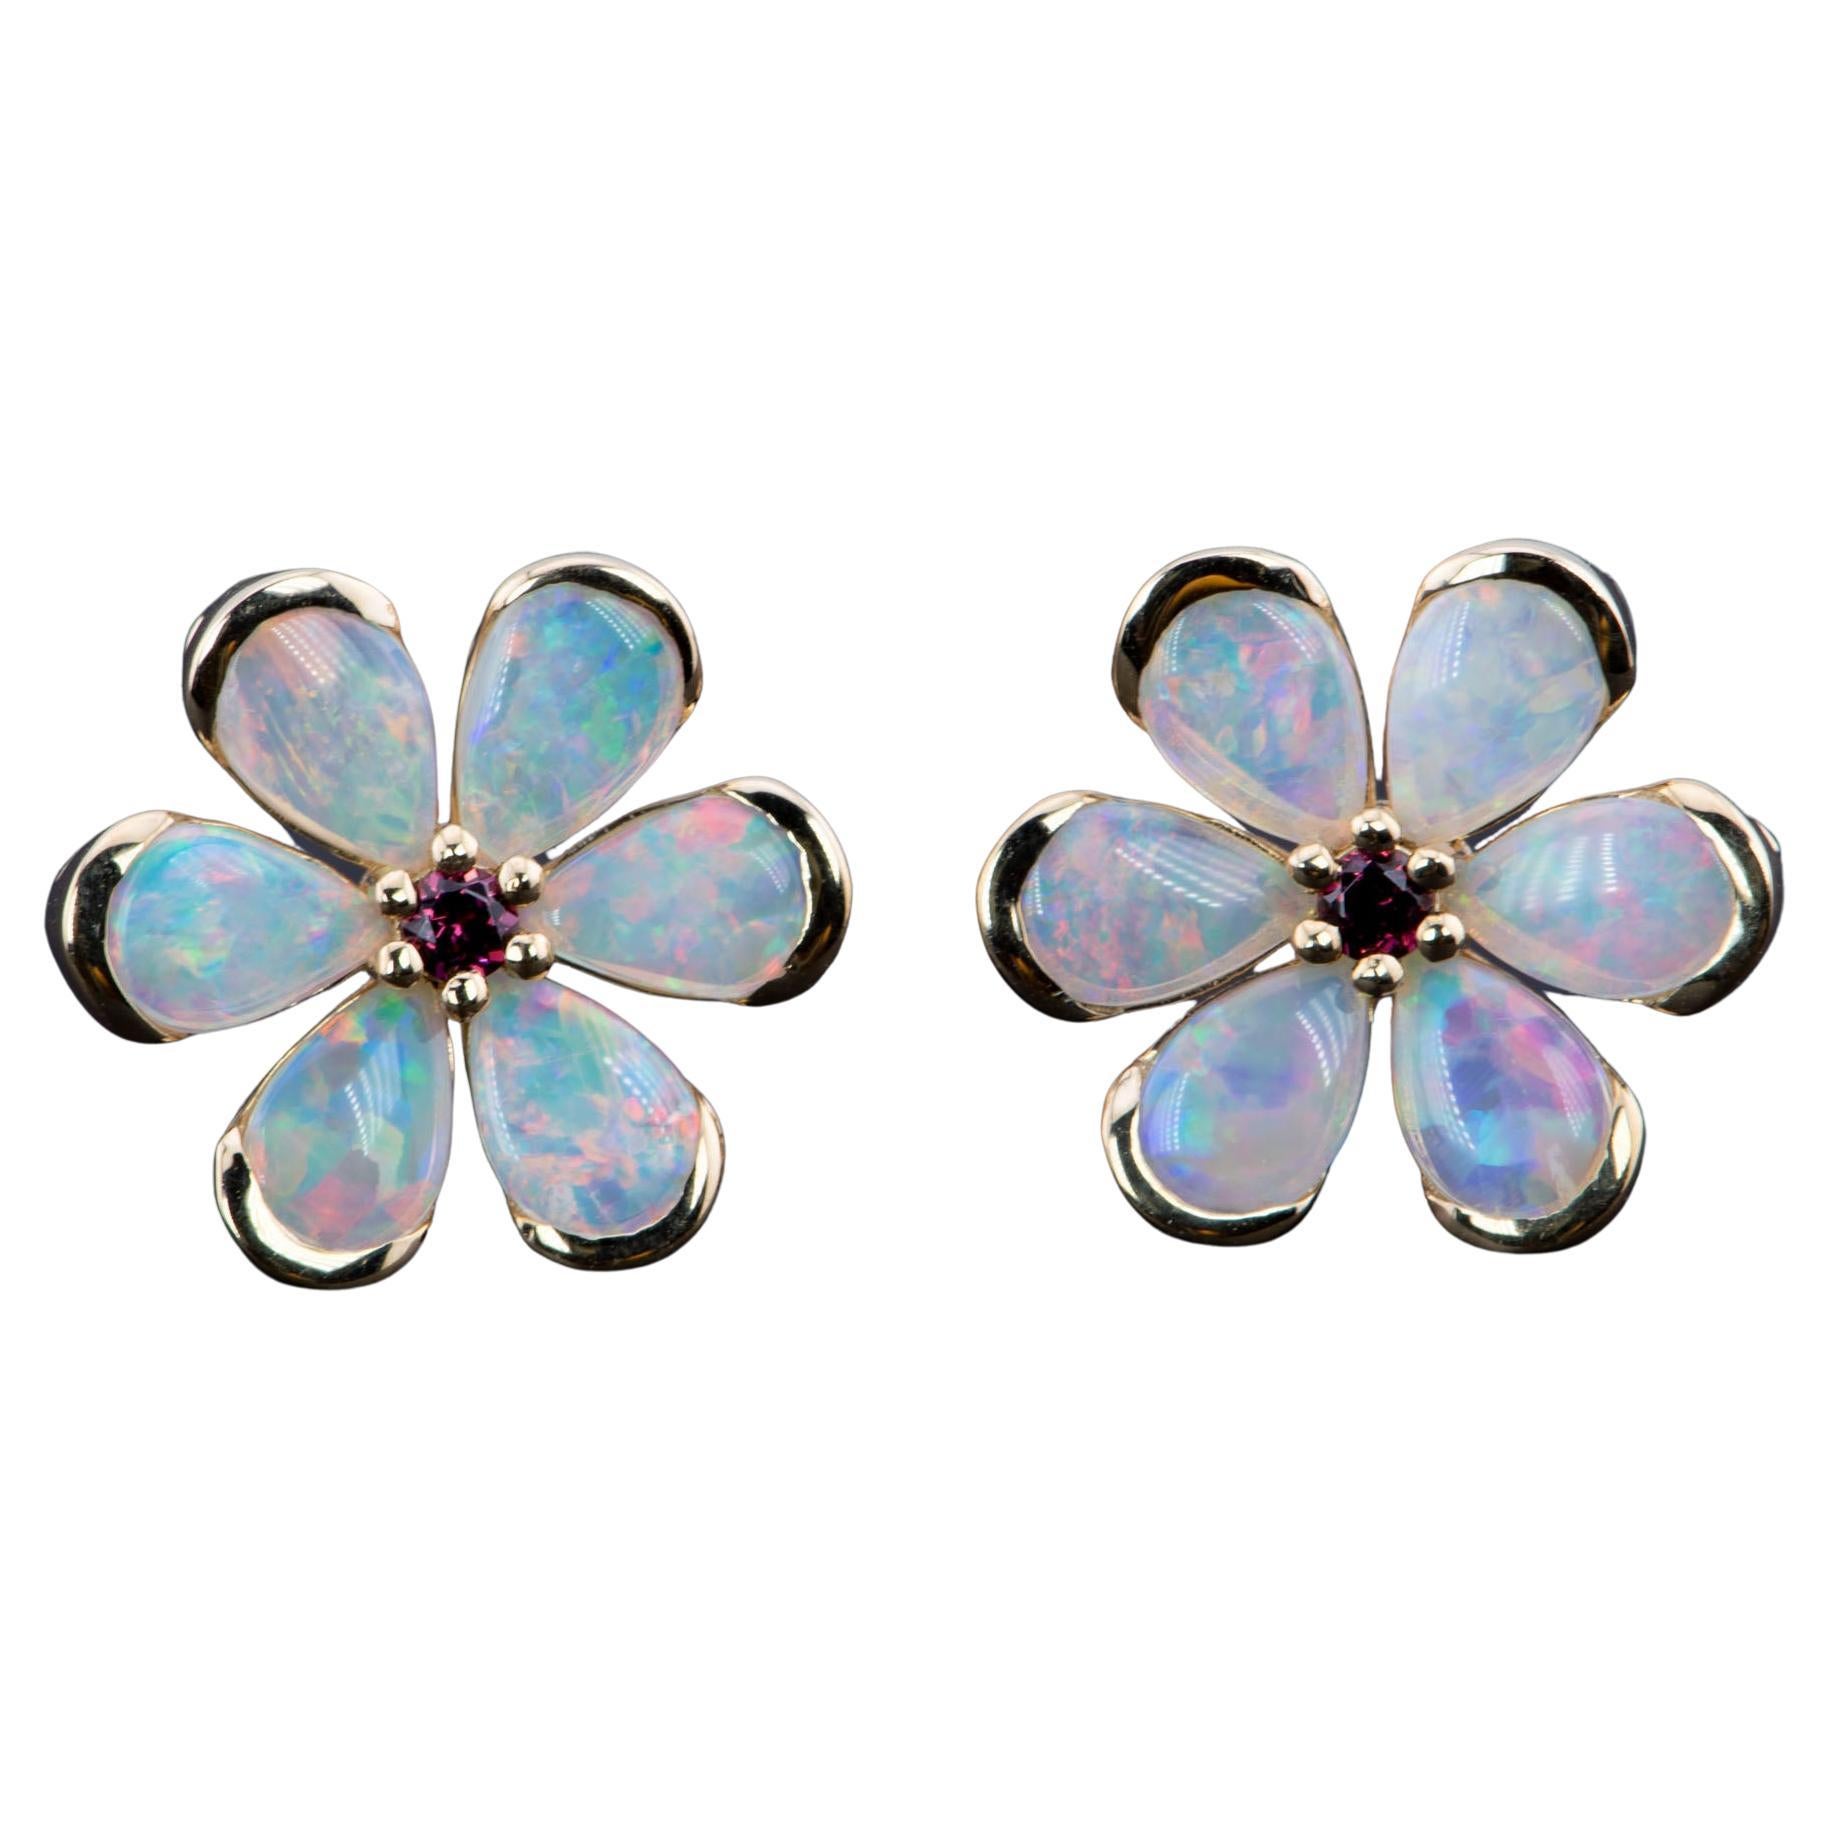 Solid Australian Opal Floral Style Earrings with Garnet Center 14K Gold For Sale